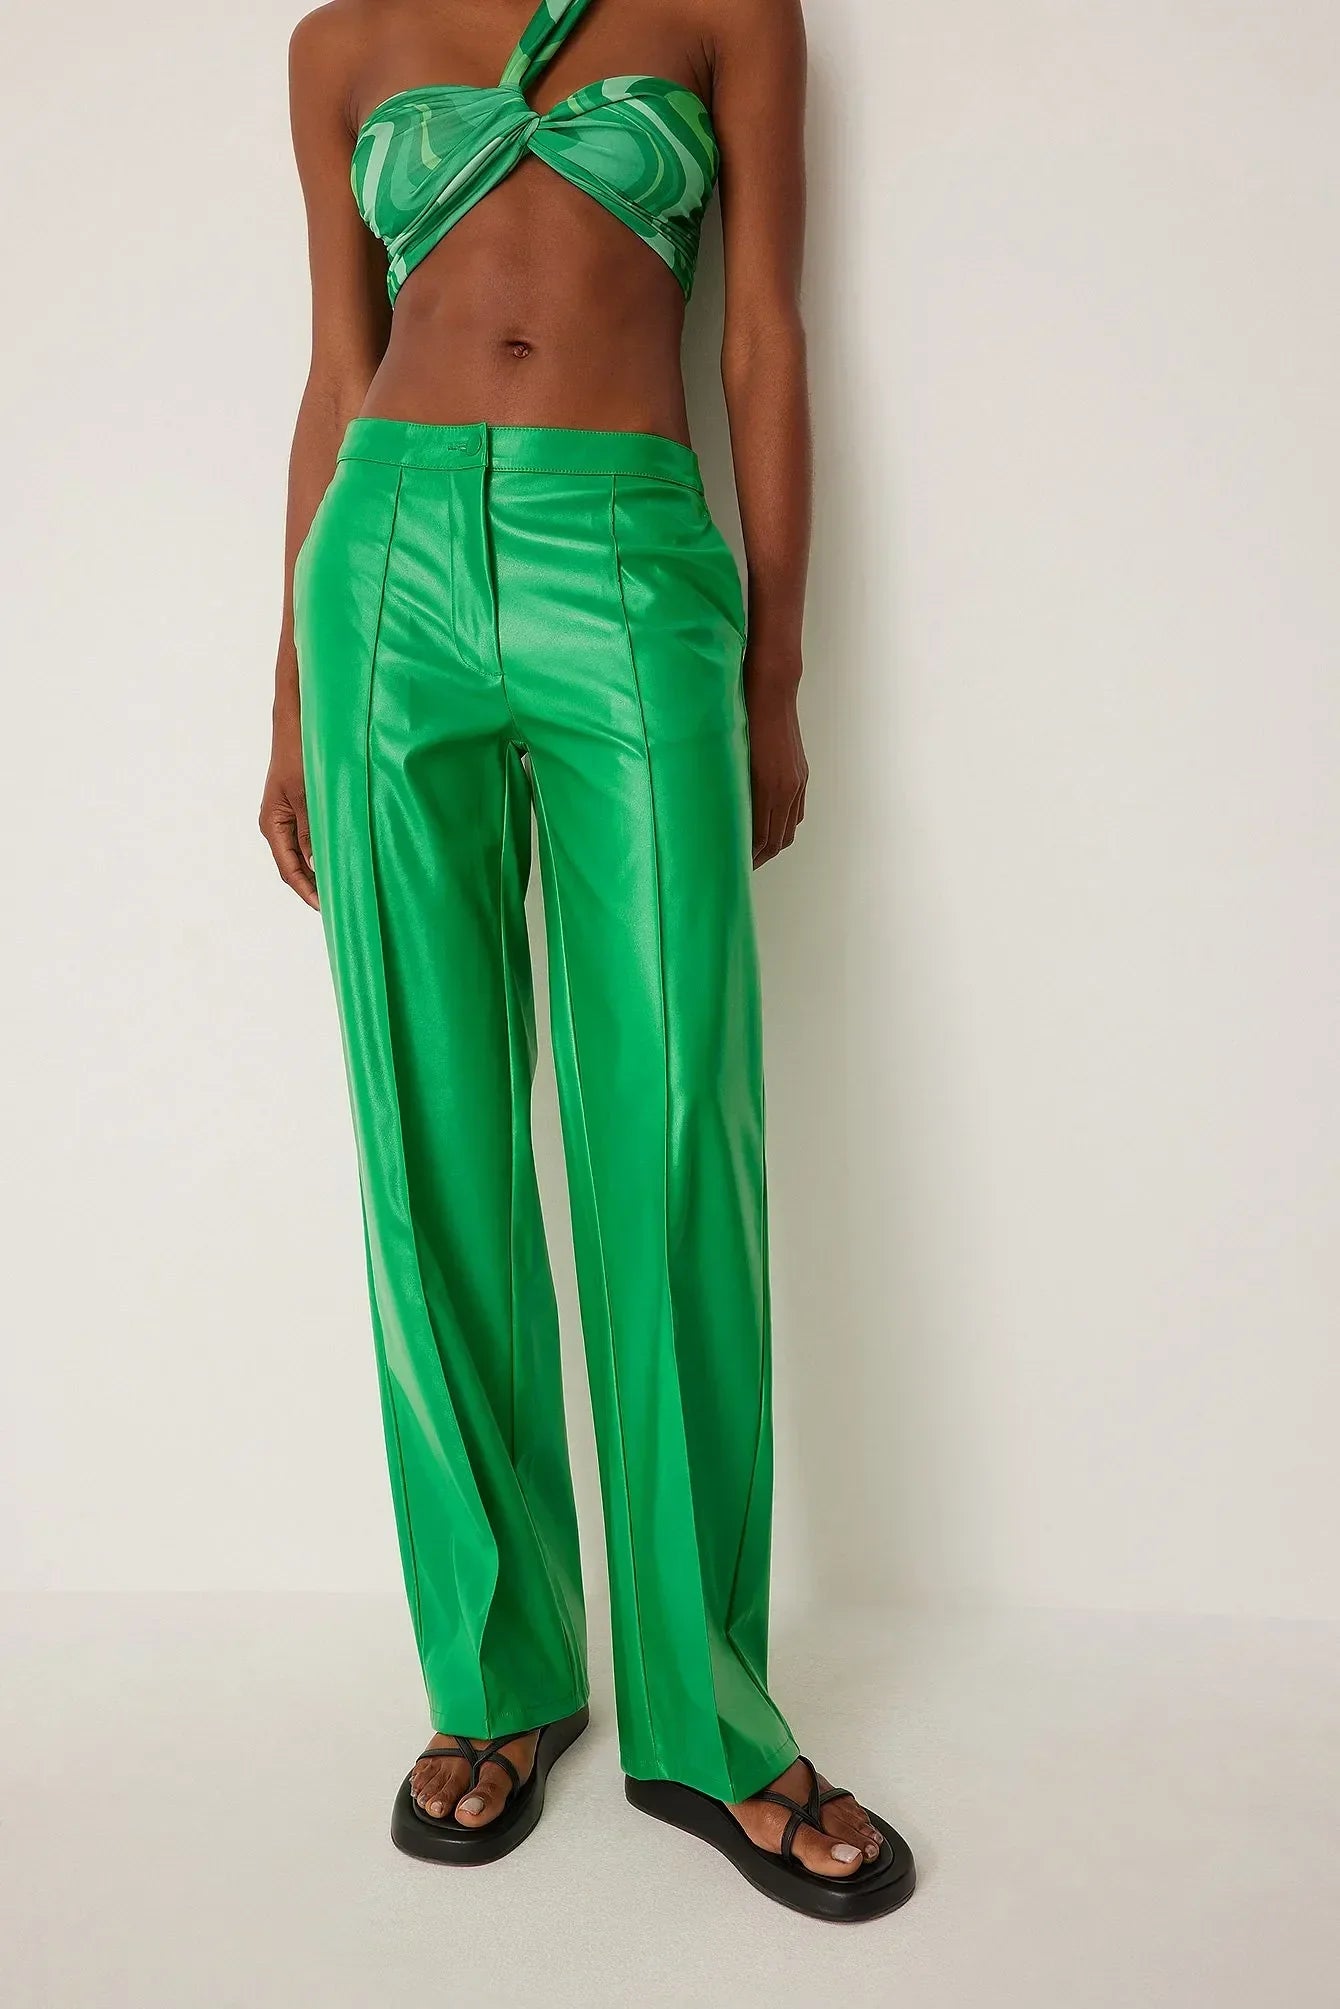 SHINY PU STRAIGHT FIT SUMMER PANTS - EXCLUSIVE Pants from NA-KD - Just €68! SHOP NOW AT IAMINHATELOVE BOTH IN STORE FOR CYPRUS AND ONLINE WORLDWIDE @ IAMINHATELOVE.COM